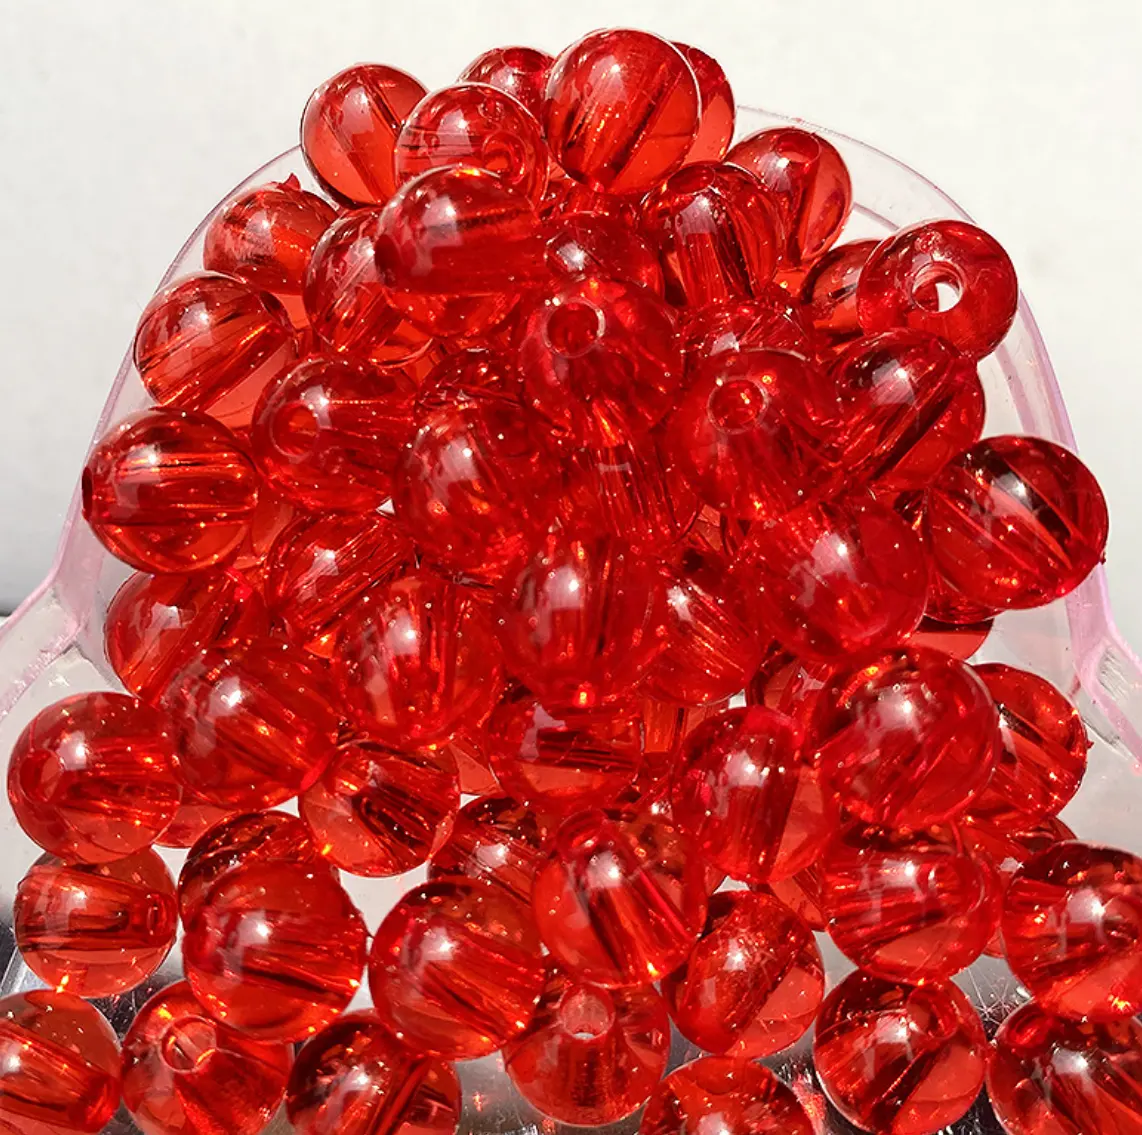 4mm 6mm 8mm 10mm 12mm 14mm 16mm 20mm transparency acrylic round beads with holes